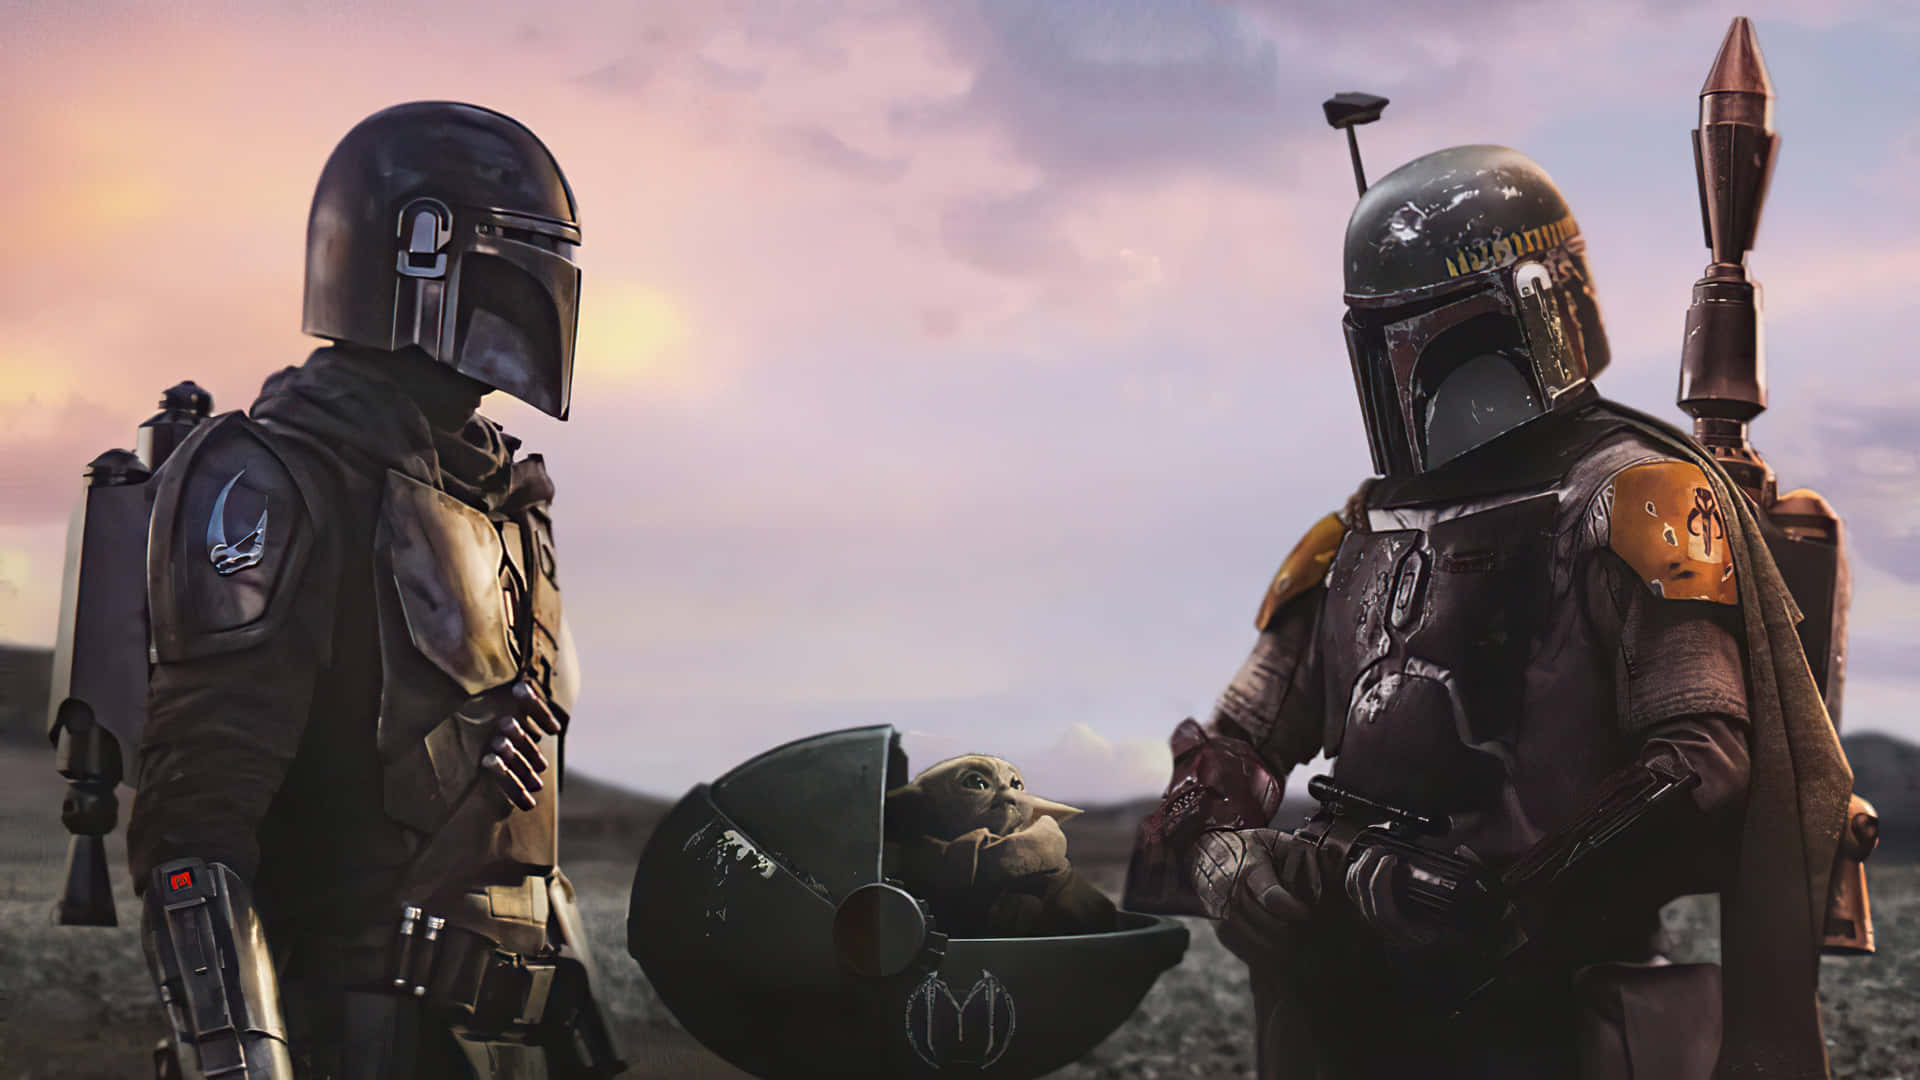 The Mandalorian and Baby Yoda in the wild landscapes of Nevarro